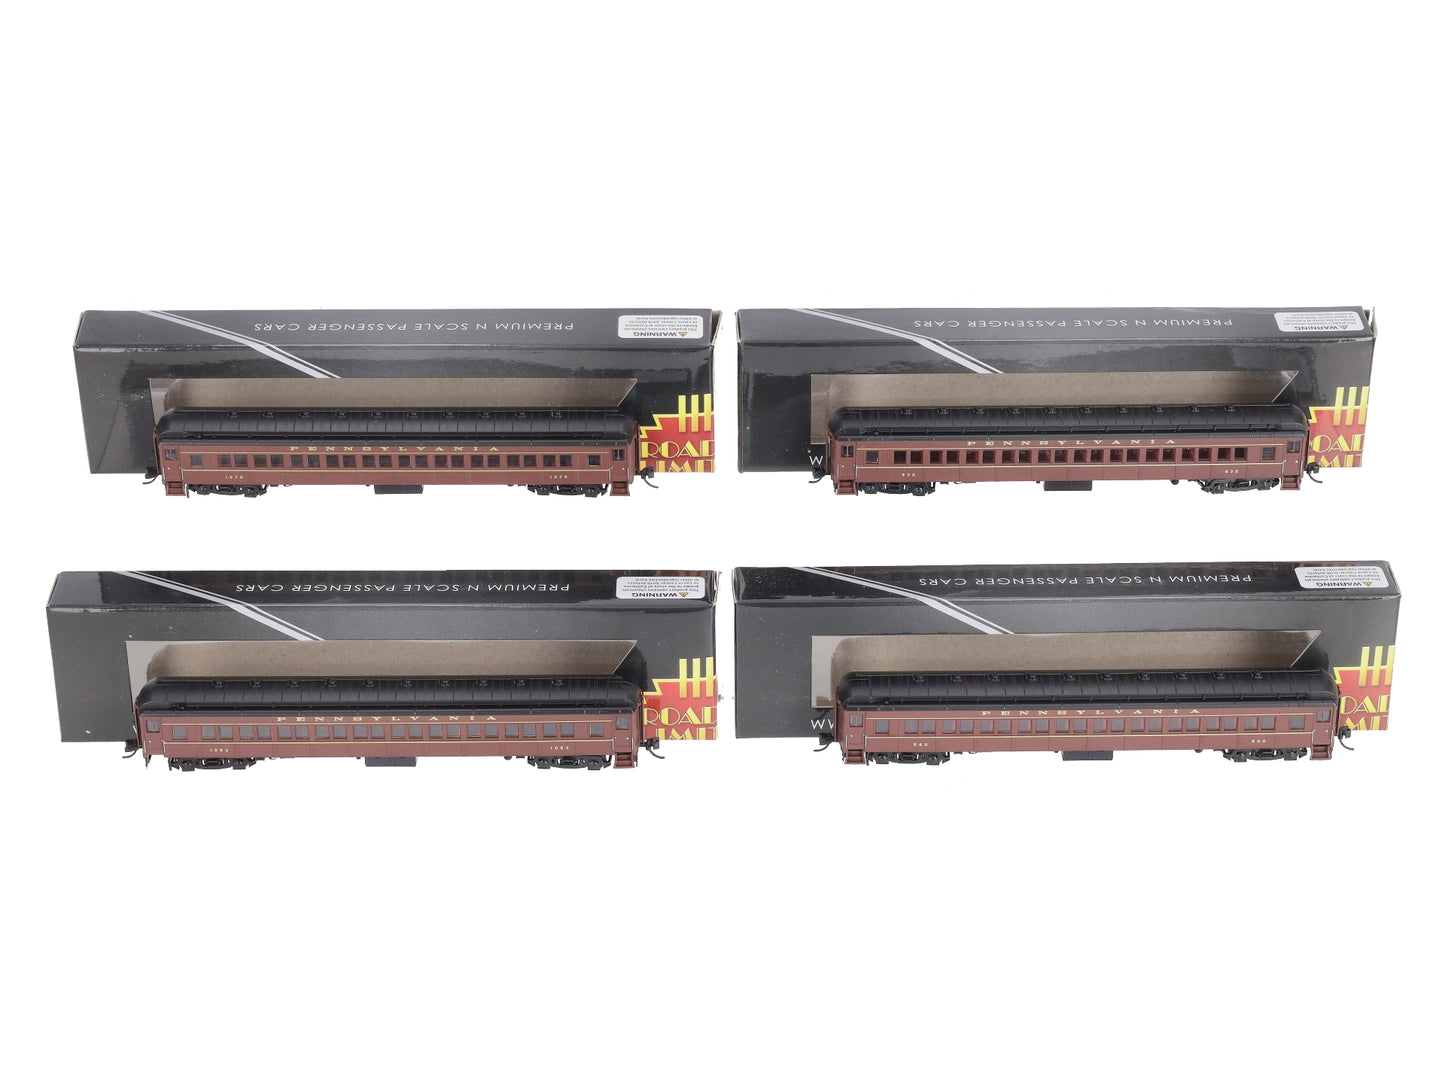 Broadway Limited 3766 N Pennsylvania P70 Passenger Cars (Pack of 4)